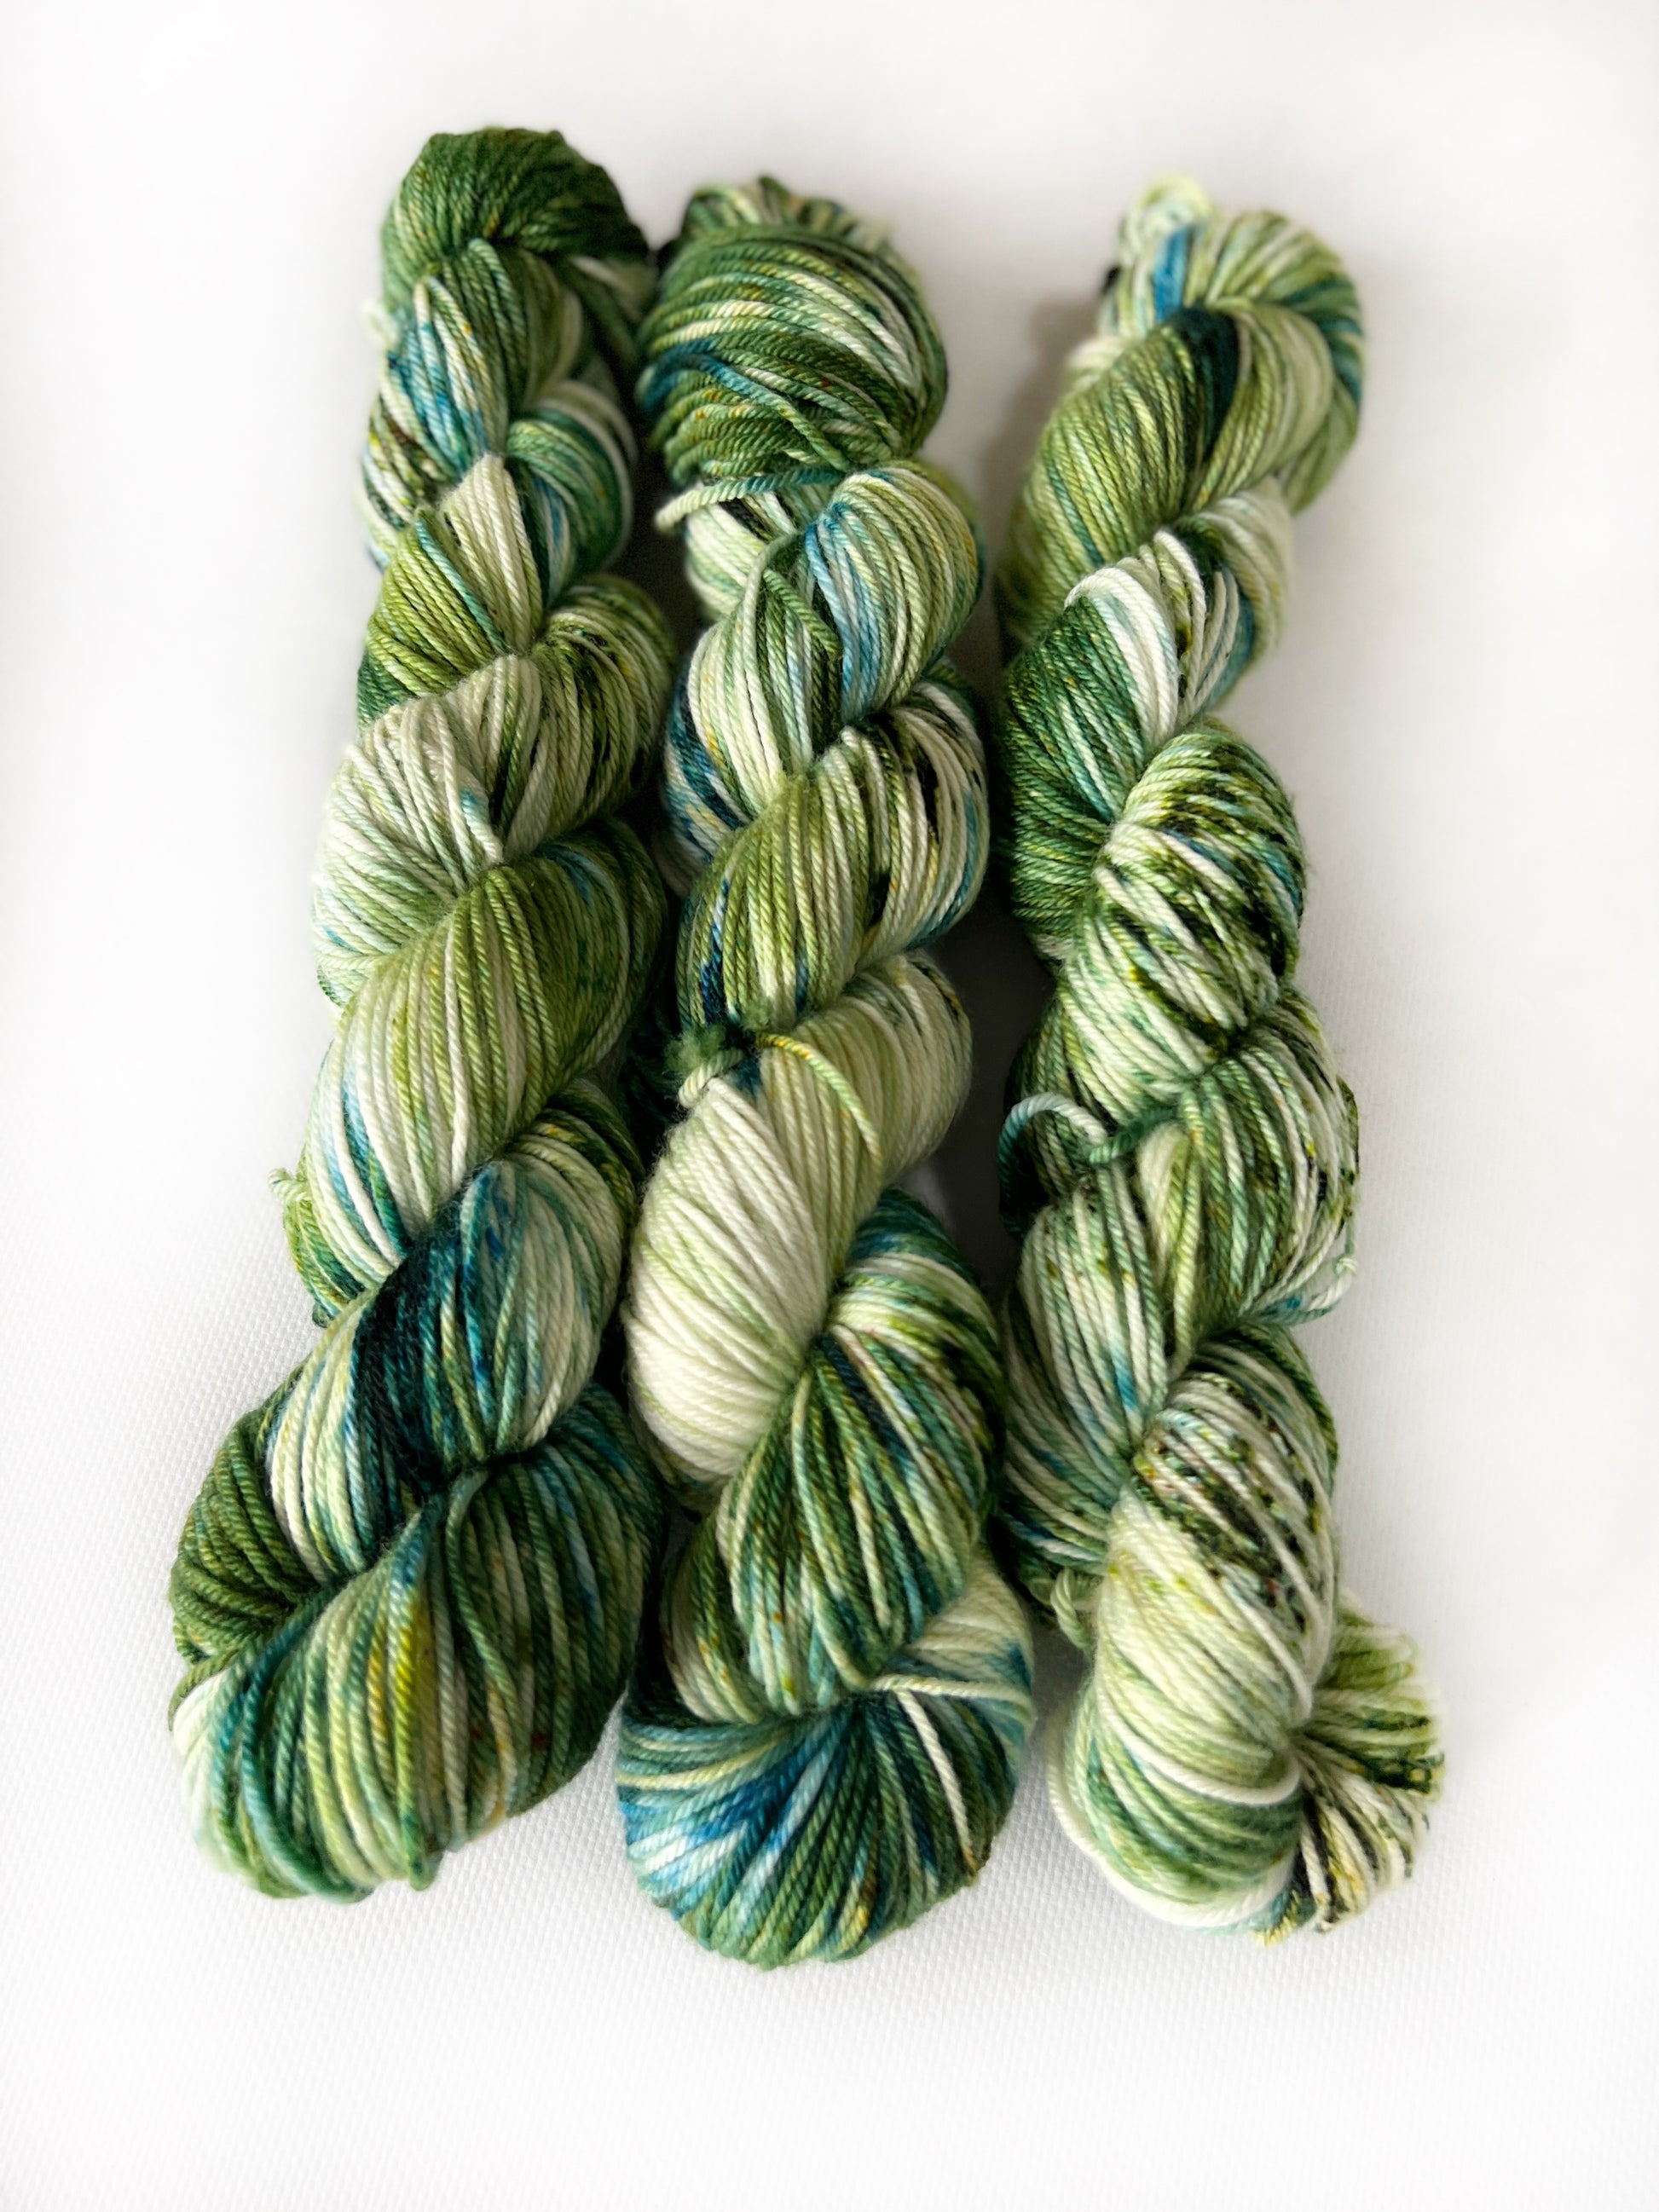 Leopold | Hand Dyed DK Weight Yarn